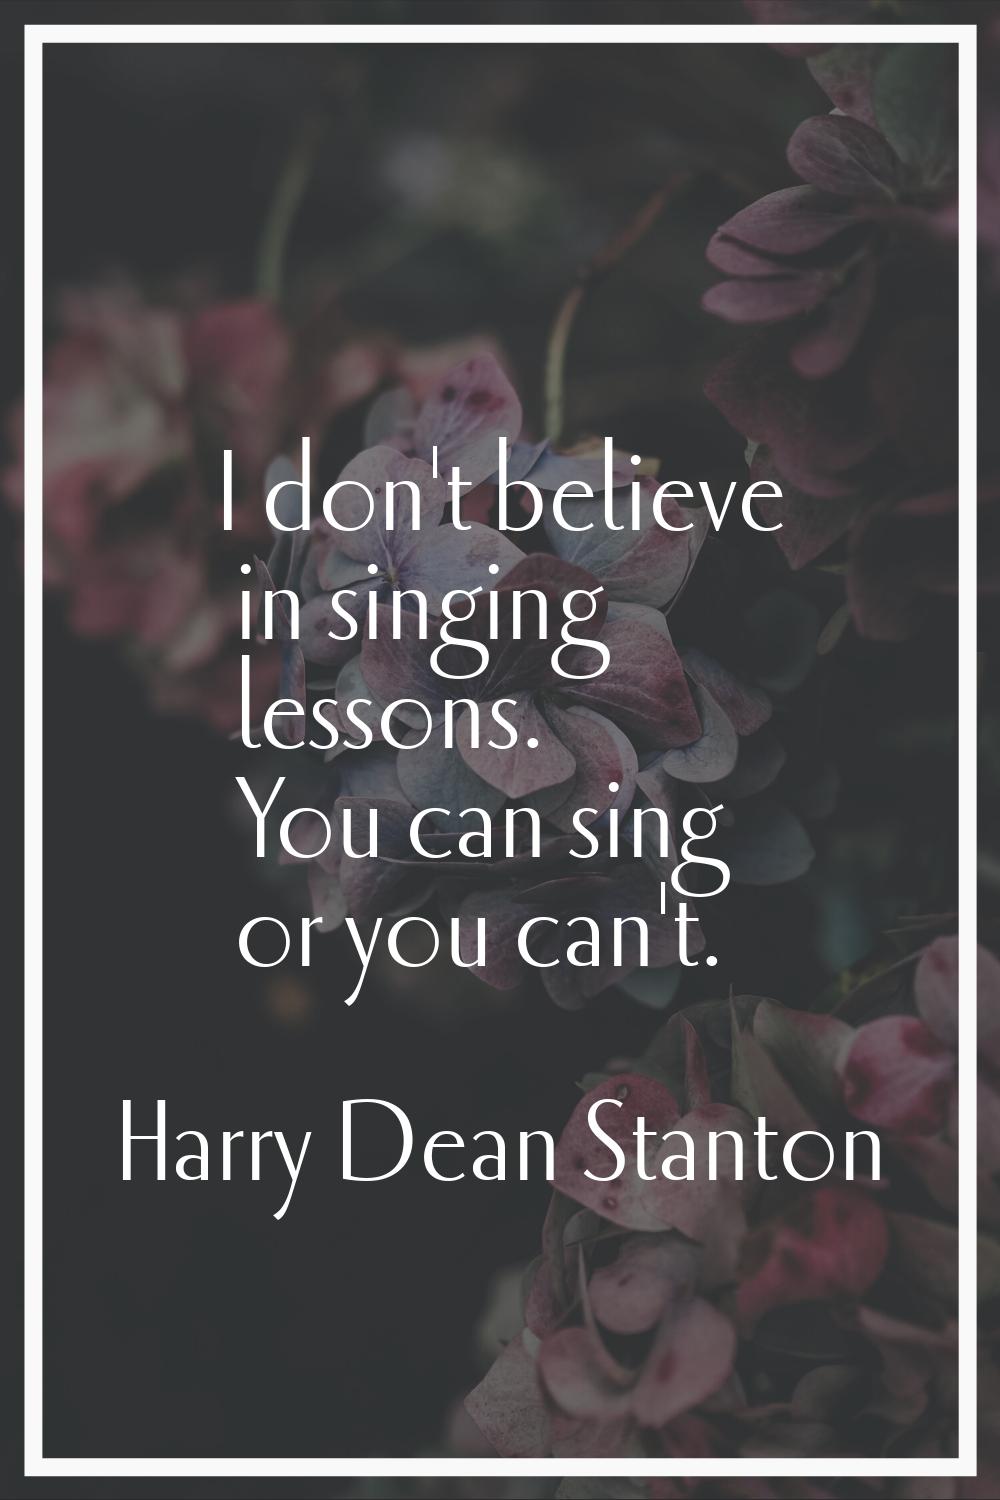 I don't believe in singing lessons. You can sing or you can't.